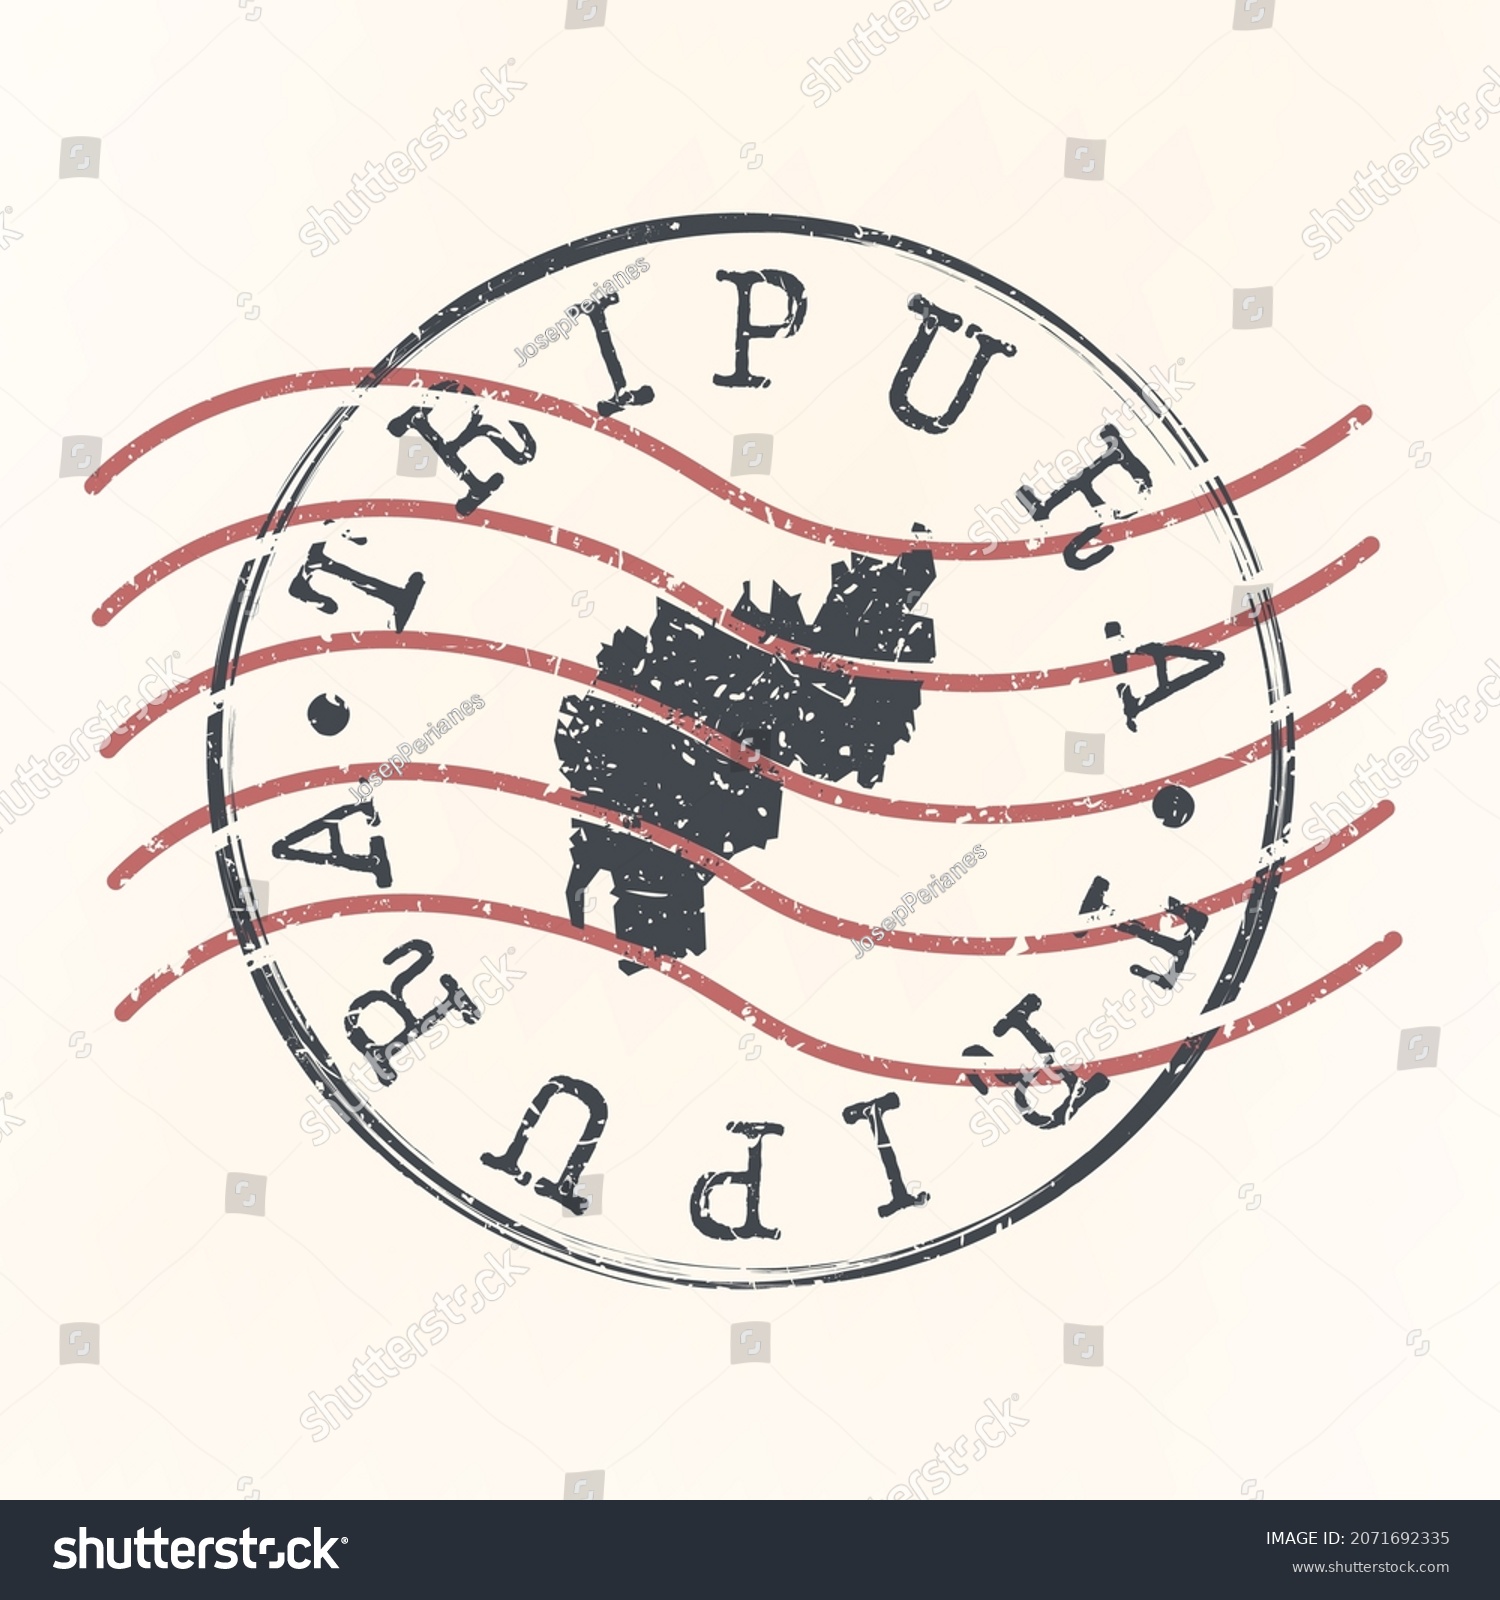 Tripura India Stamp Map Postal Silhouette Stock Vector (Royalty Free ...